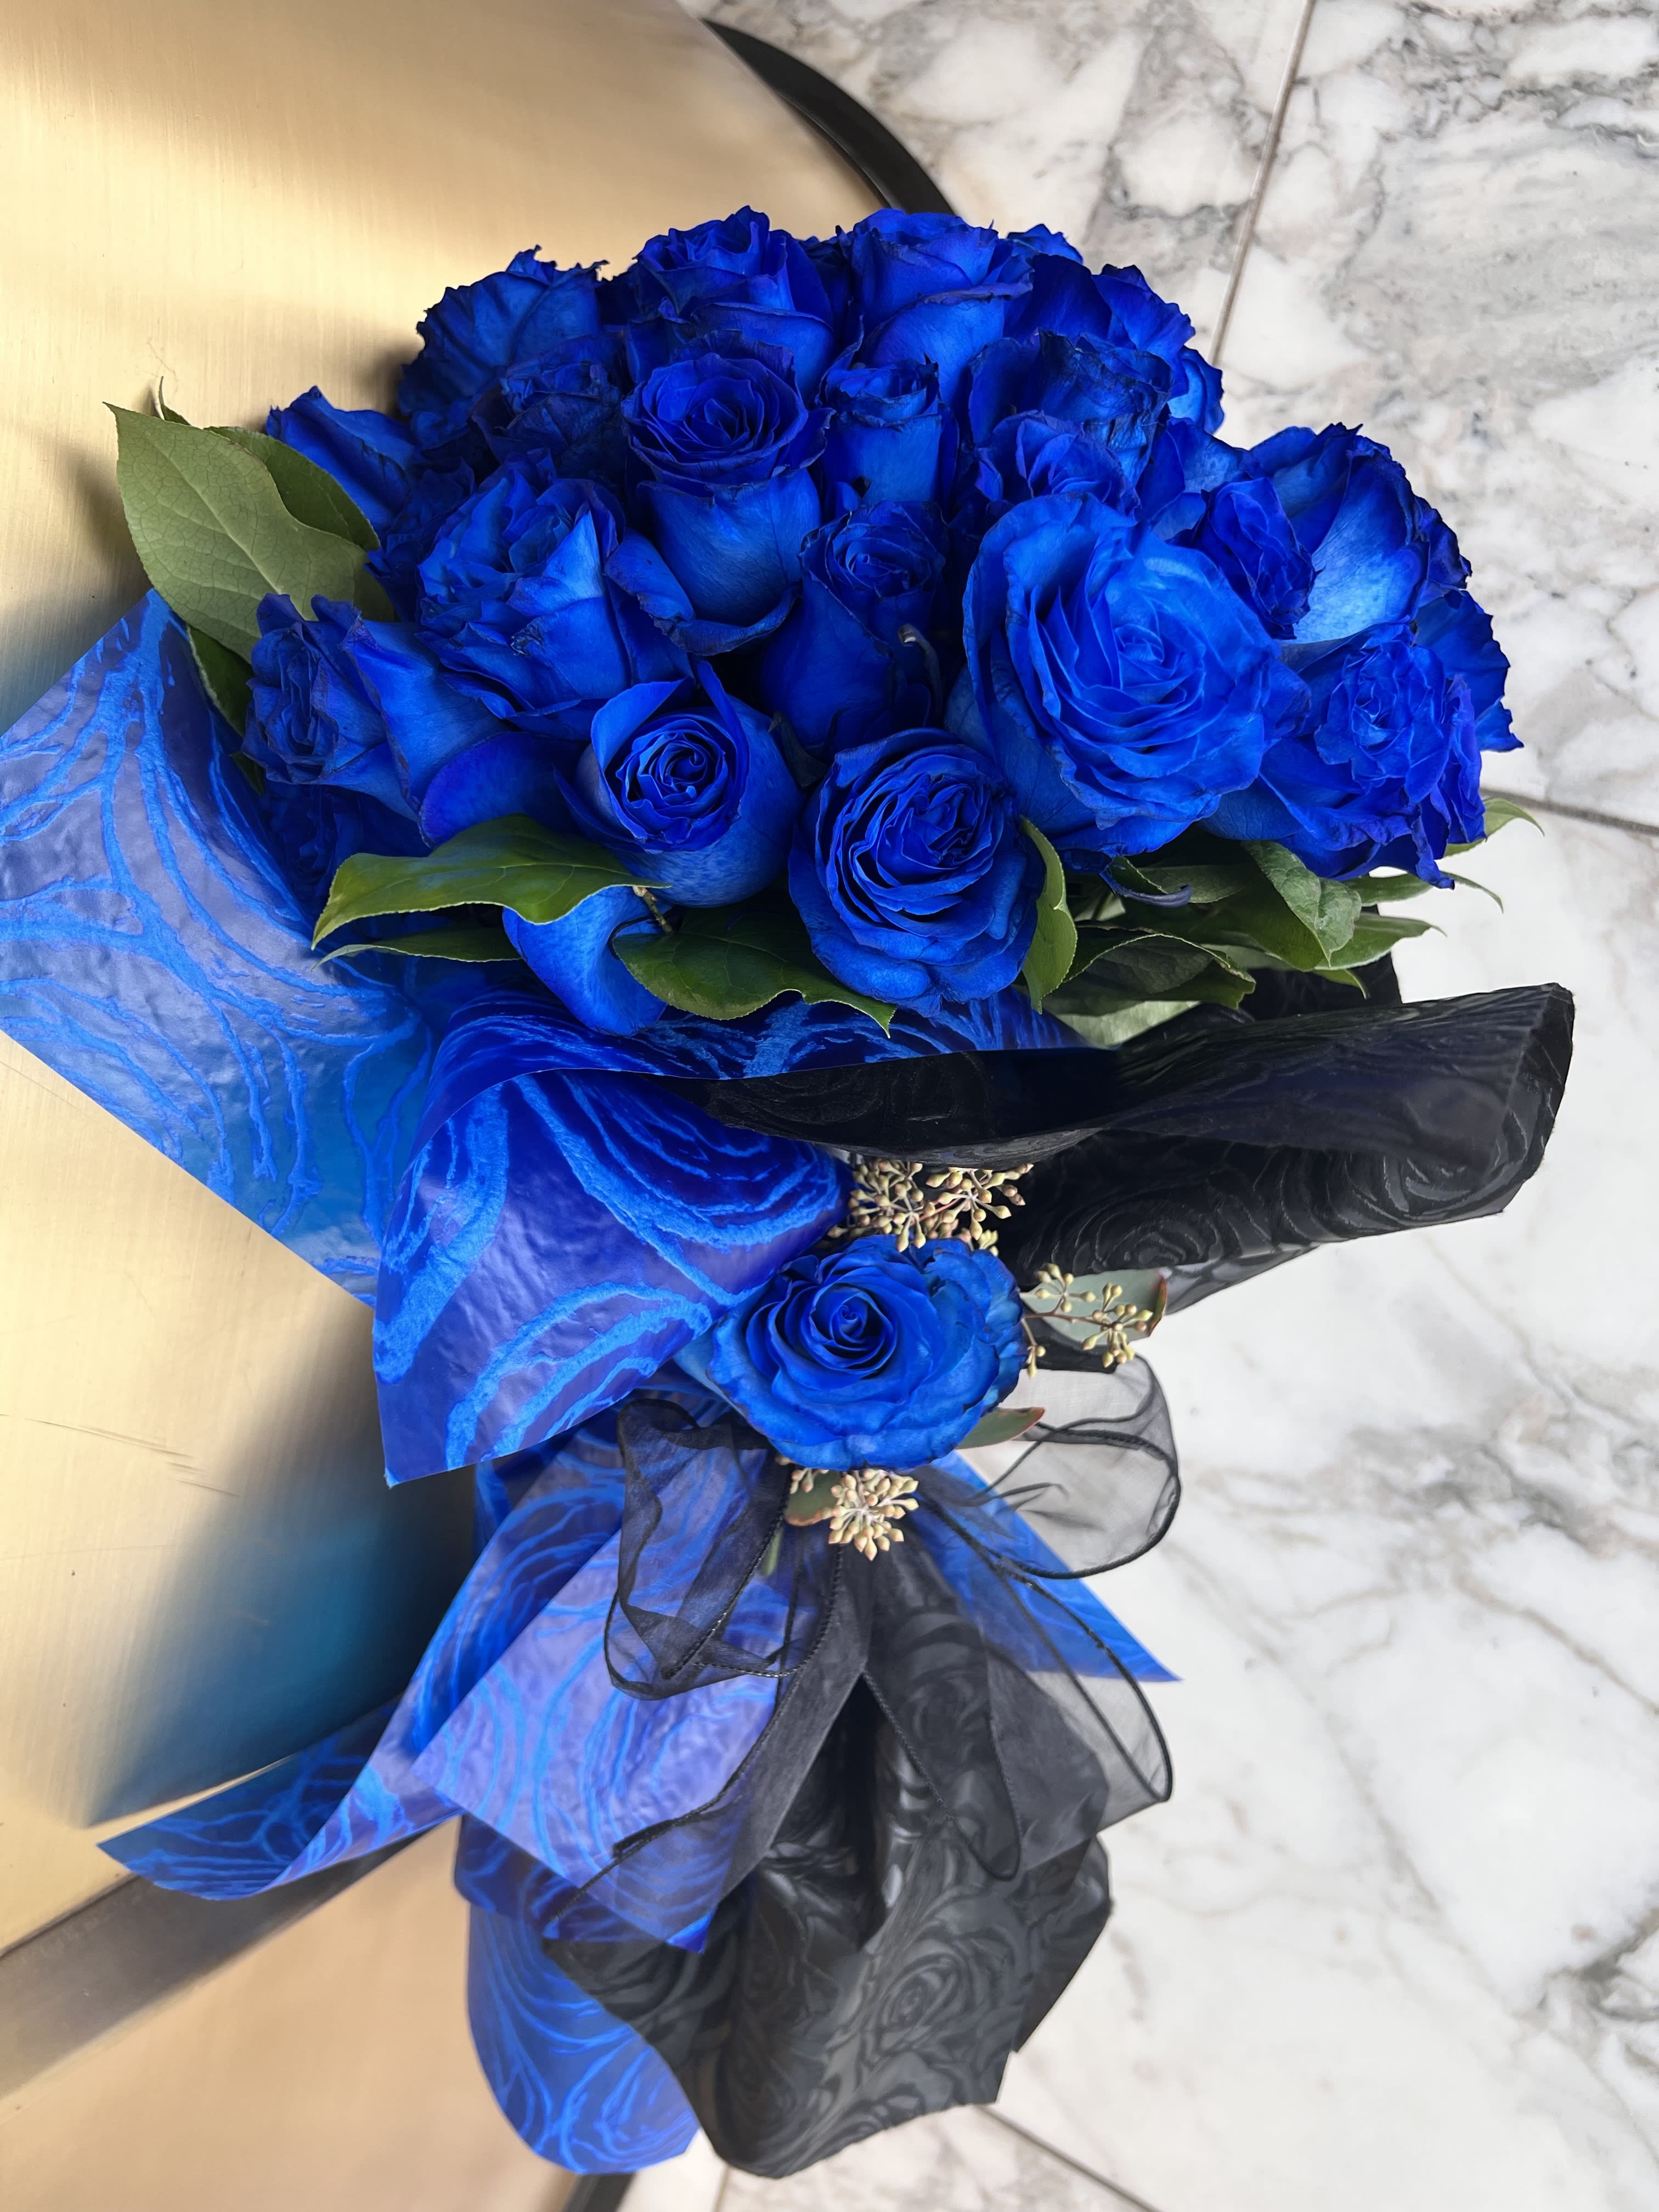 50 Premium Royal Blue Roses by Downtown Flowers